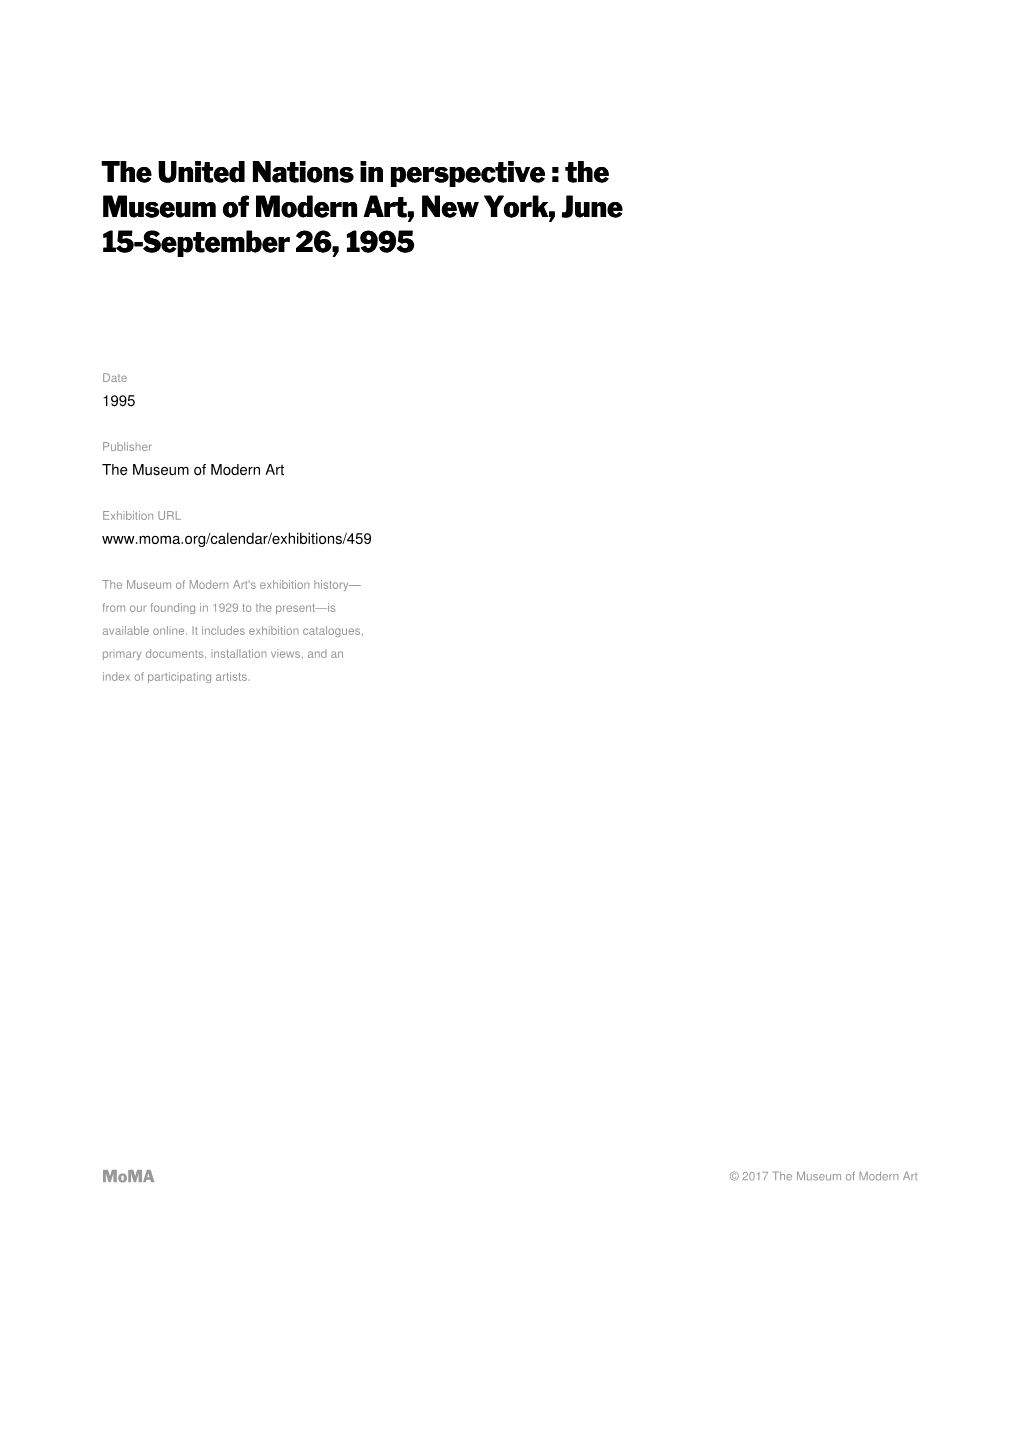 The United Nations in Perspective : the Museum of Modern Art, New York, June 15-September 26, 1995